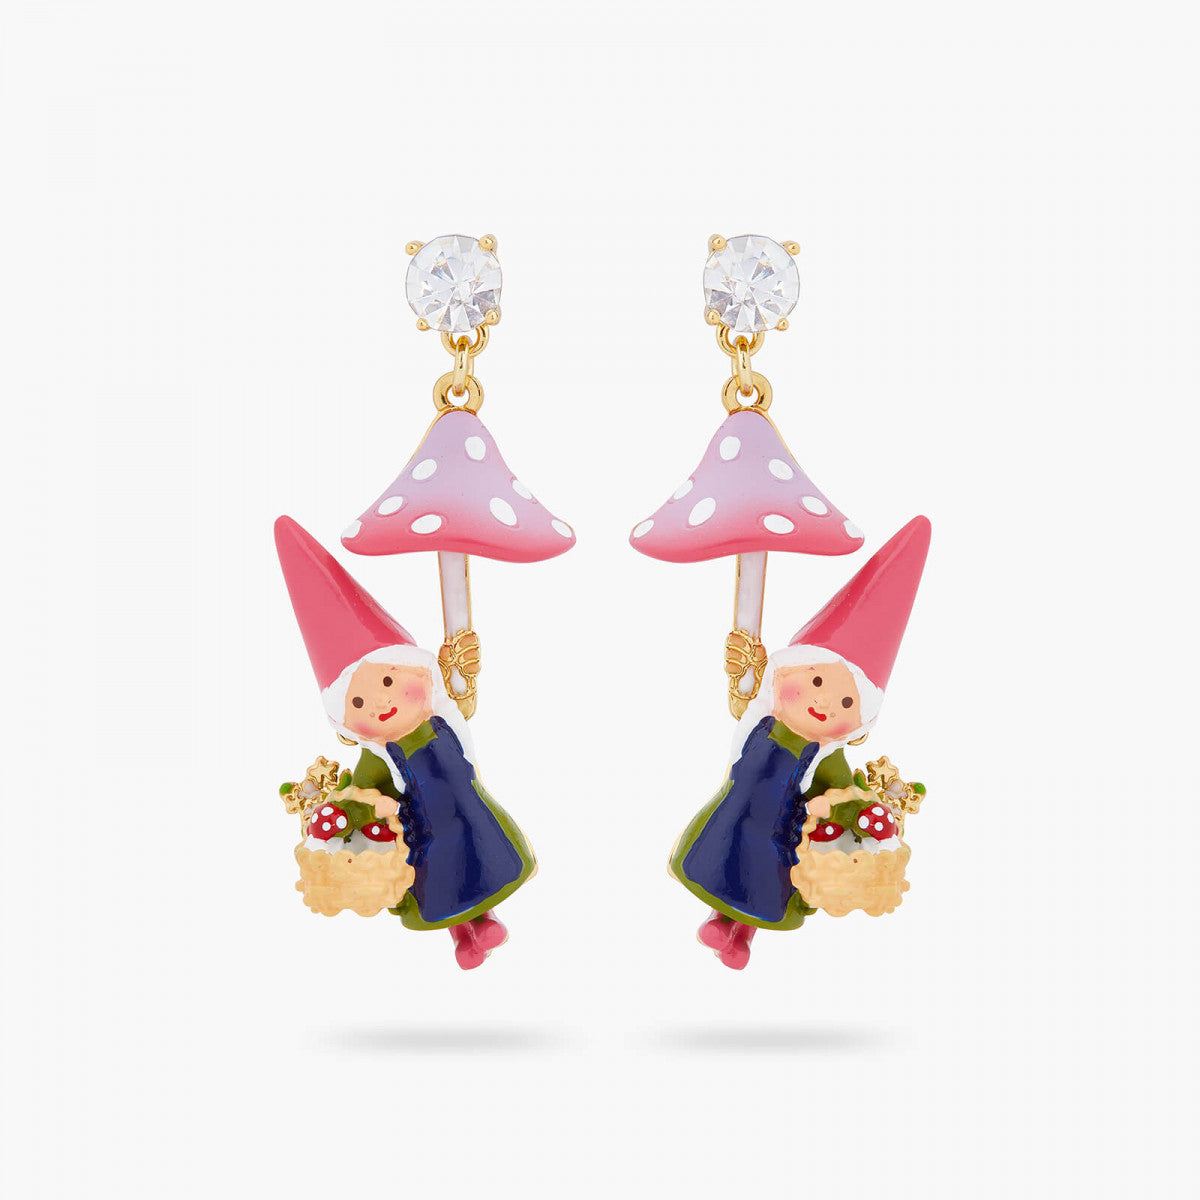 GARDEN GNOME LADY AND MUSHROOM PICKING POST EARRINGS